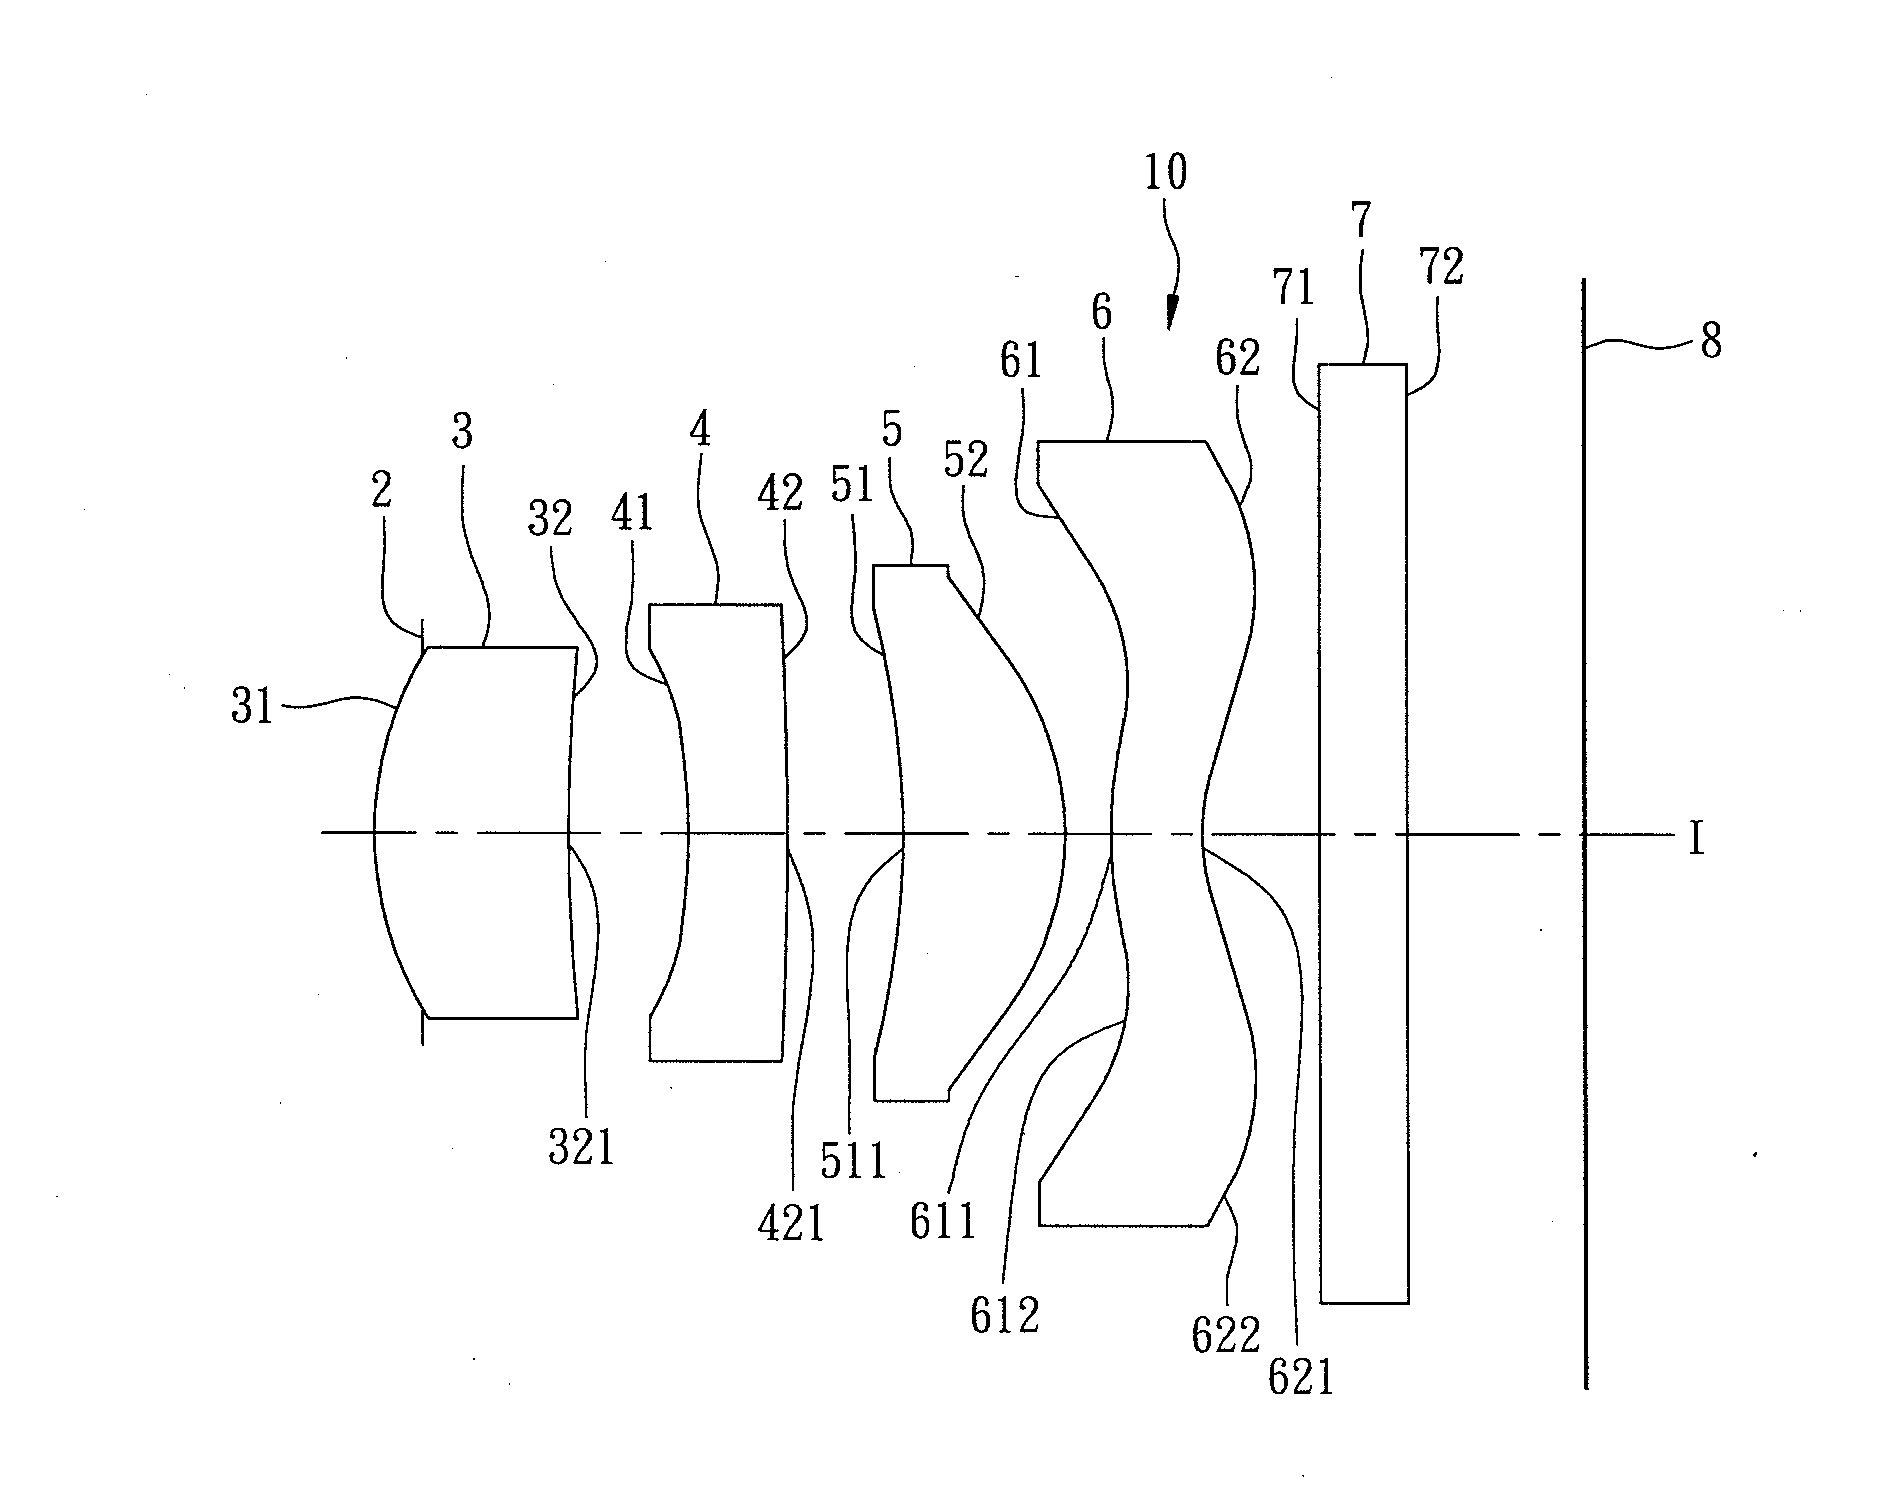 Imaging Lens Having Four Lens Elements, and Electronic Apparatus Having the Same